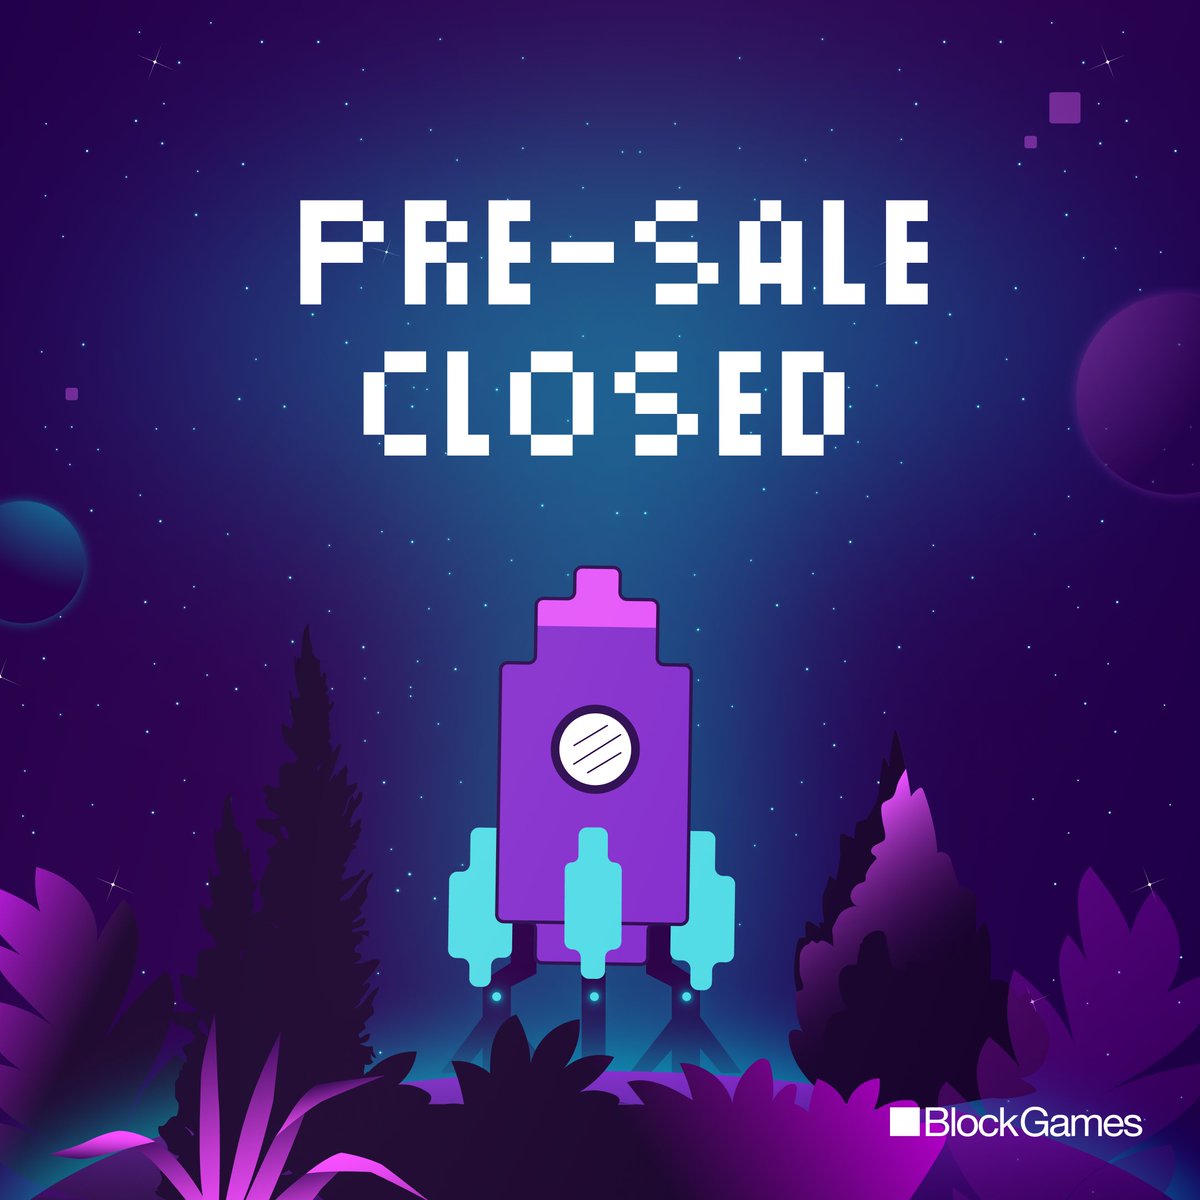 🟪 $BLOCK PRE-SALE IS OFFICIALLY CLOSED 🚀 Thank you to everyone who participated! Final allocations or refunds will be announced over the next week. Official link to follow pre-sale results and allocations remains the same 👇 presale.blockgames.com Stay tuned - next stop